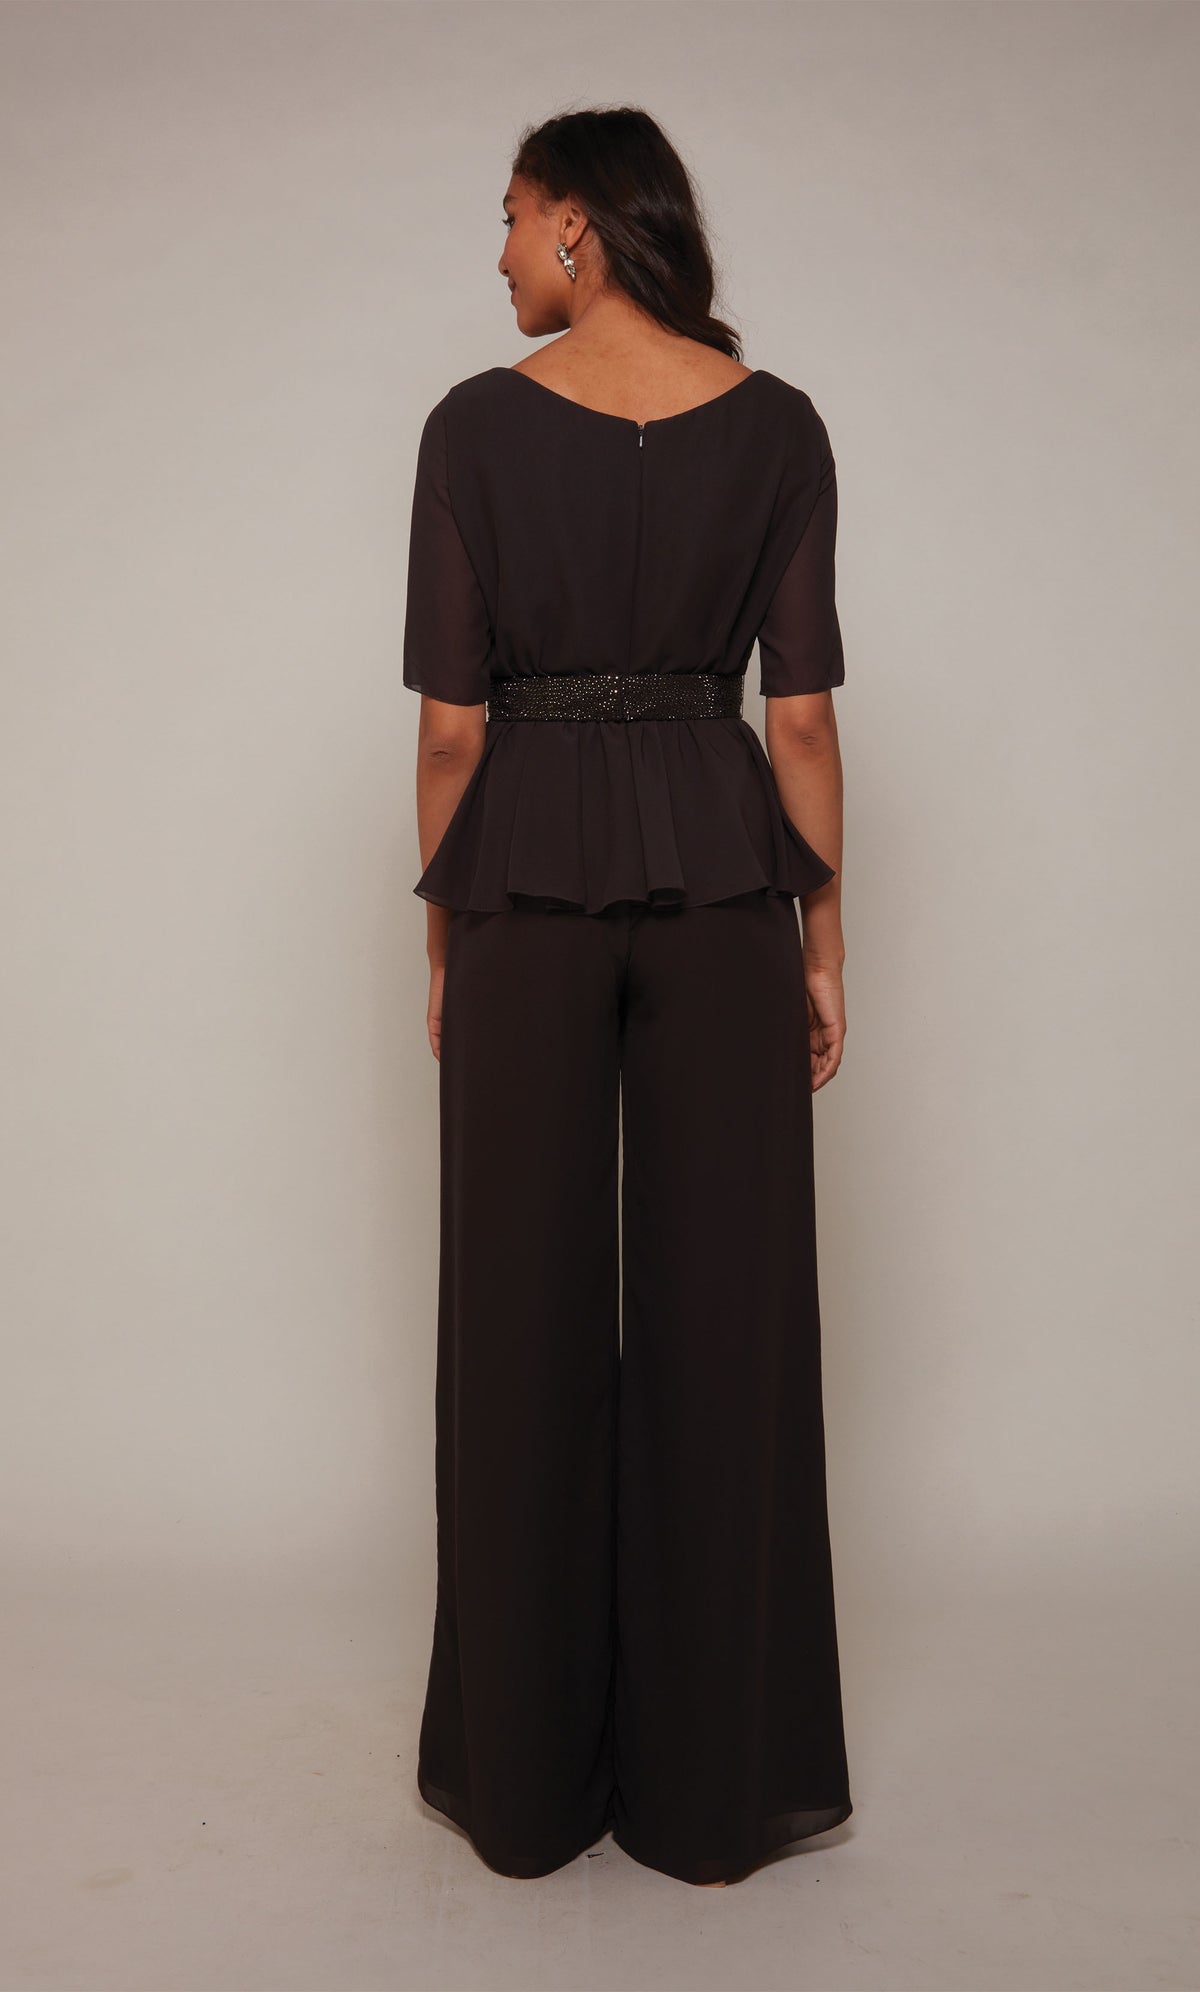 A peplum formal jumpsuit with short sleeves, an closed zipper back, an faux beaded belt at the waistline and wide leg pant in charcoal.